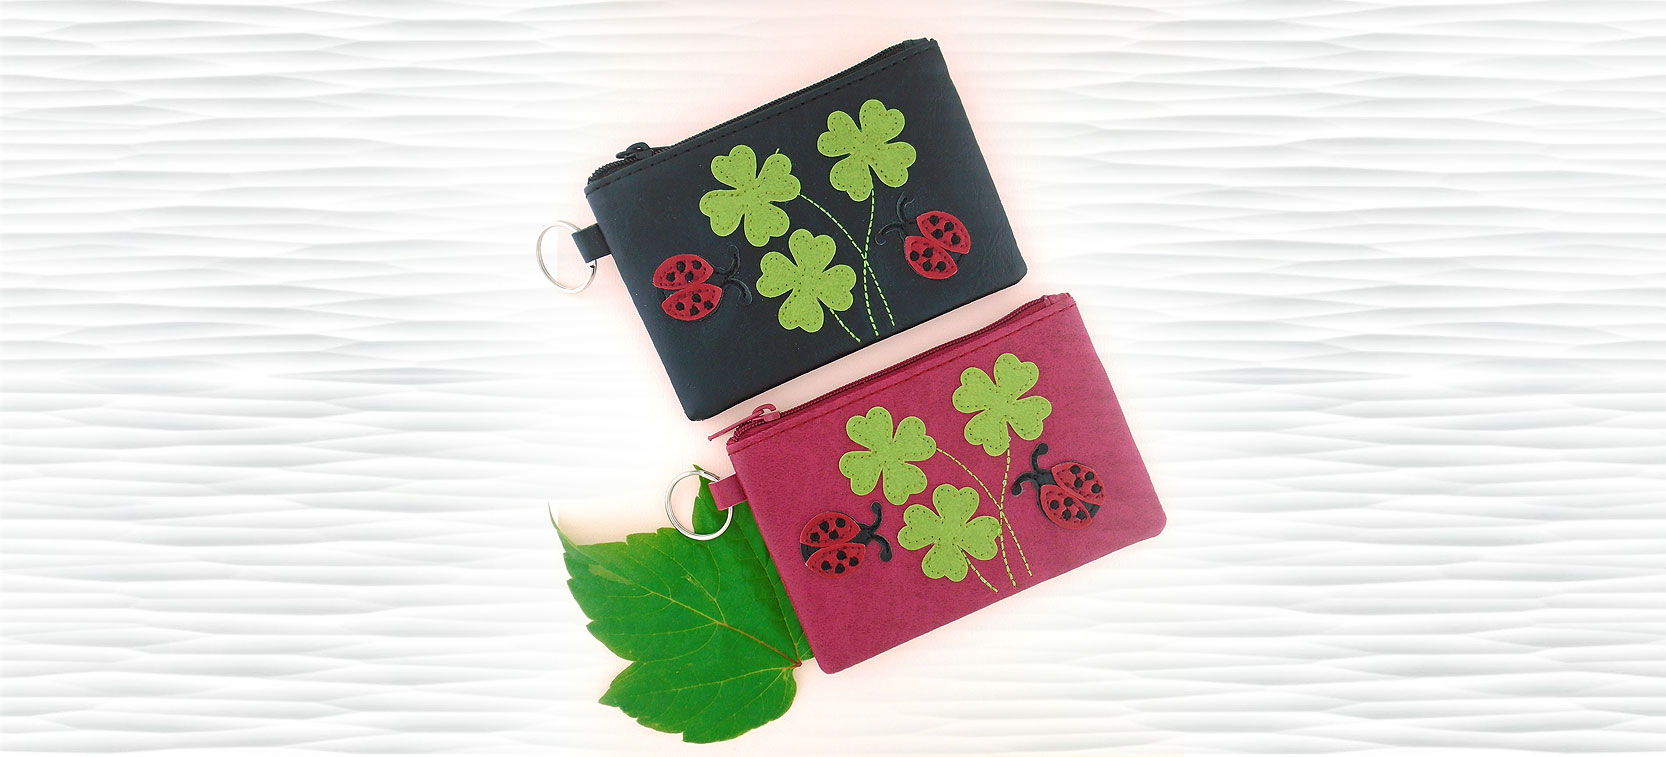 LAVISHY design and wholesale good luck/lucky ladybug themed vegan accessories and gfits to gift shops, boutiques and book stores in Canada, USA and worldwide.